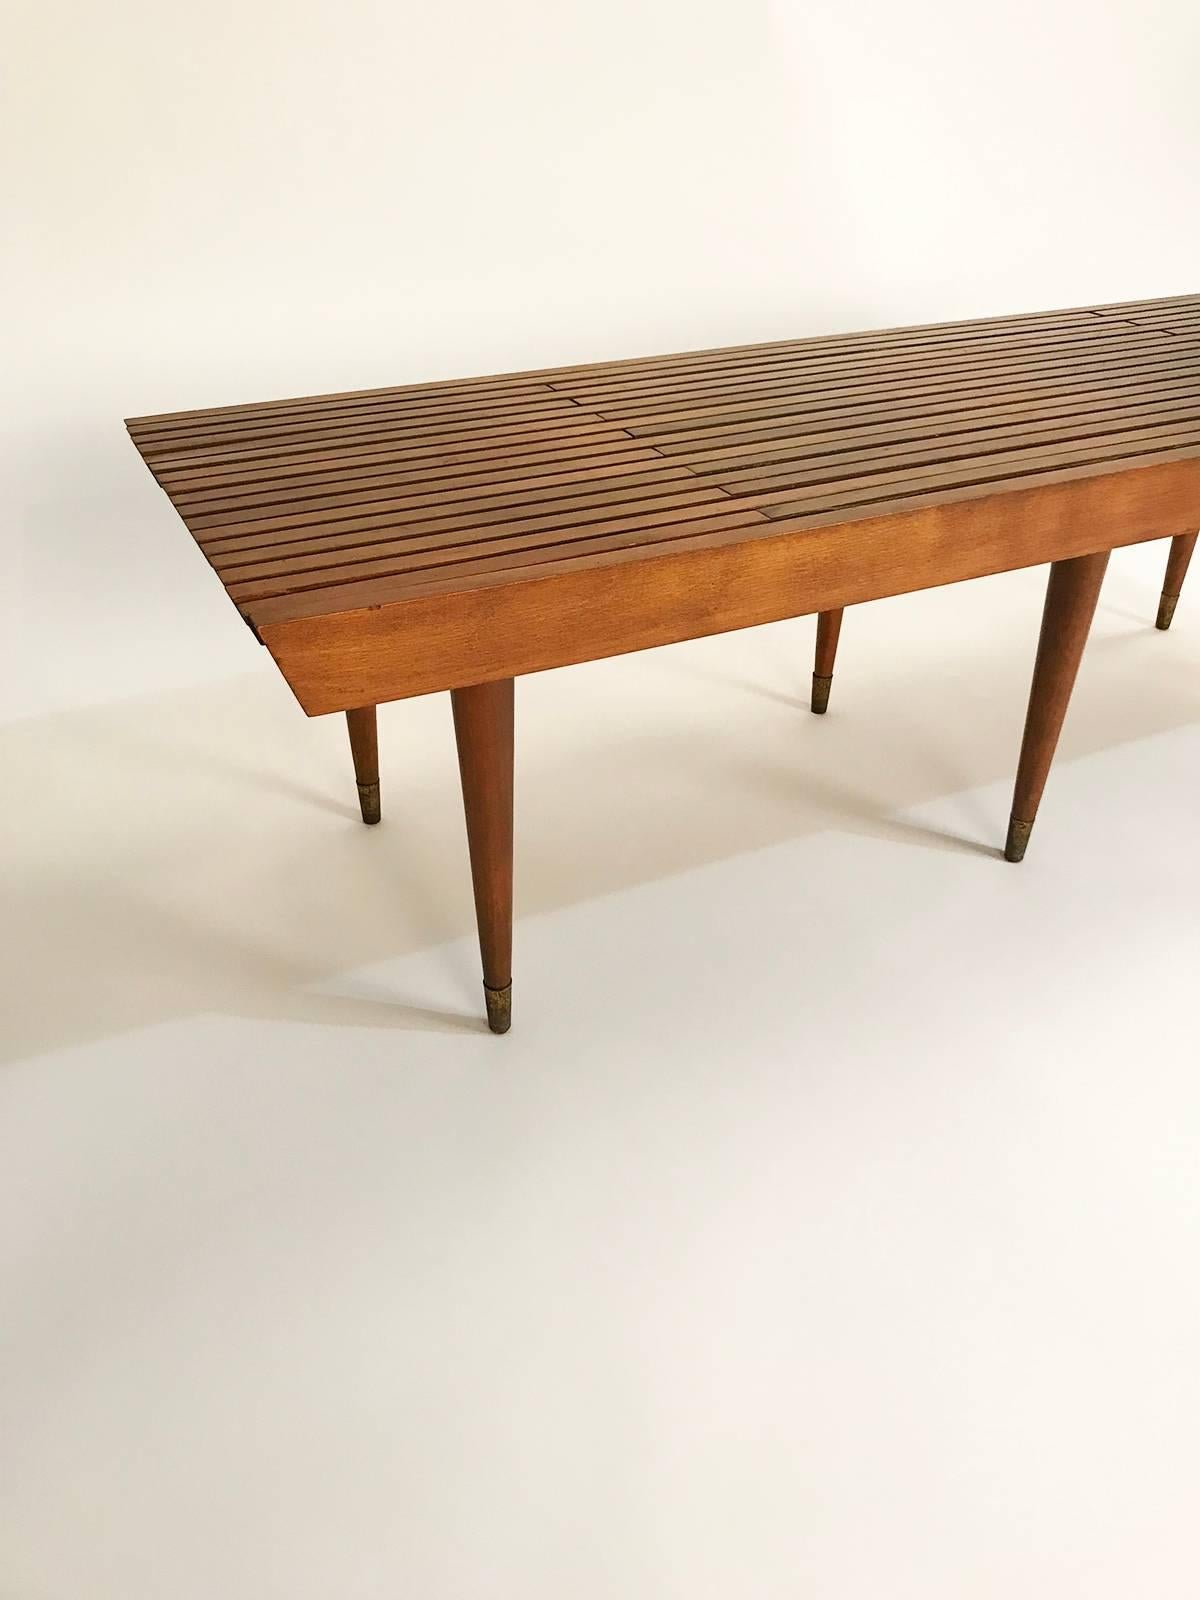 Midcentury Expandable Slat Bench or Coffee Table 1